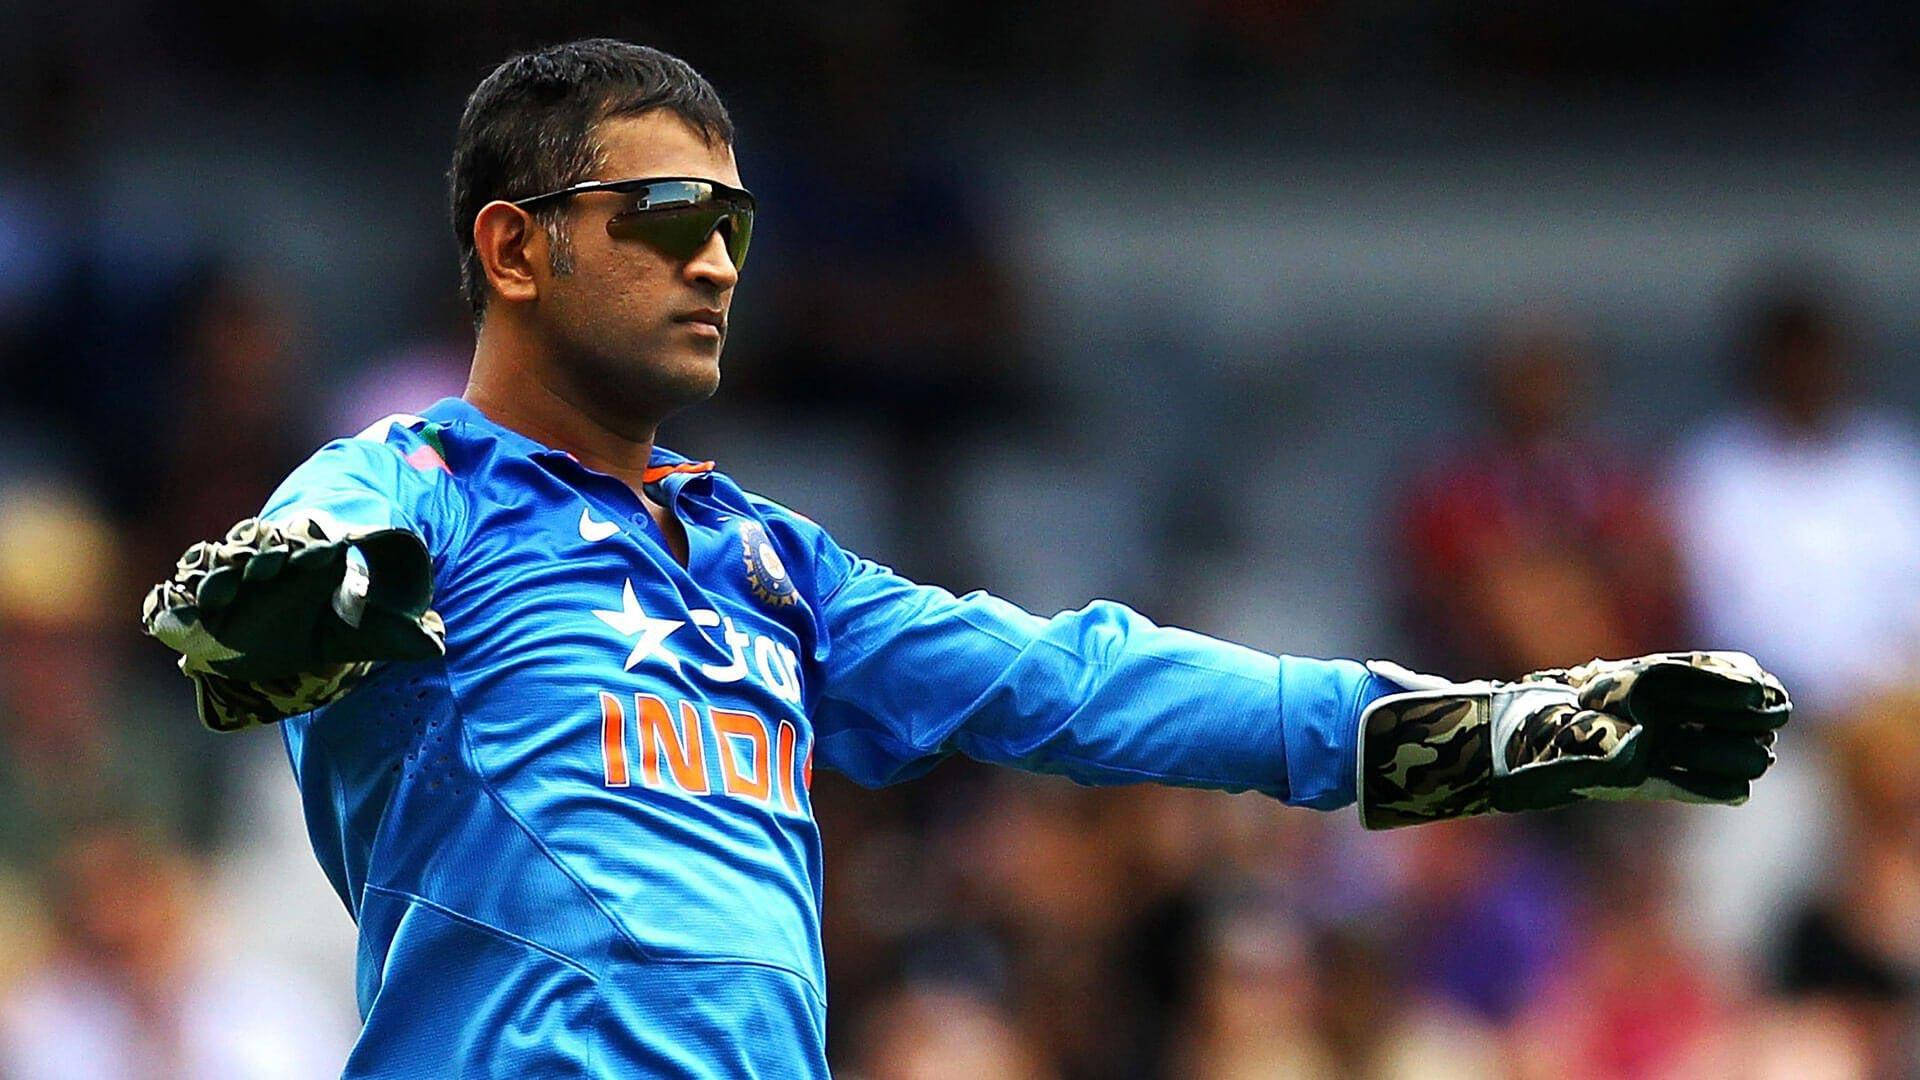 Ms Dhoni Hd Shades Background